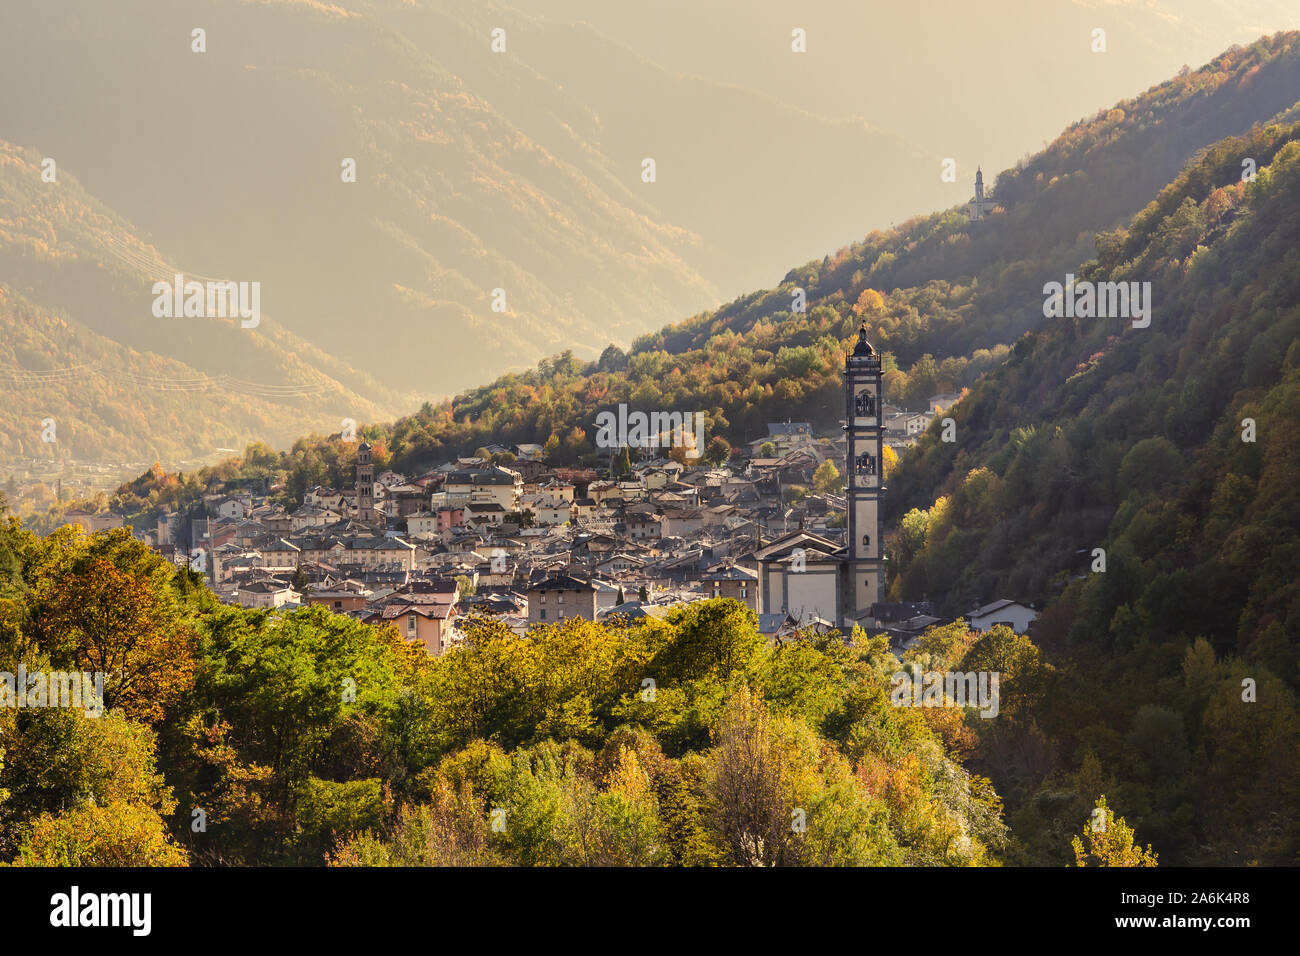 The small town of Grosotto, located in the Valtellina valley in the Alps, in northern Italy, on a sunny autumn afternoon Stock Photo